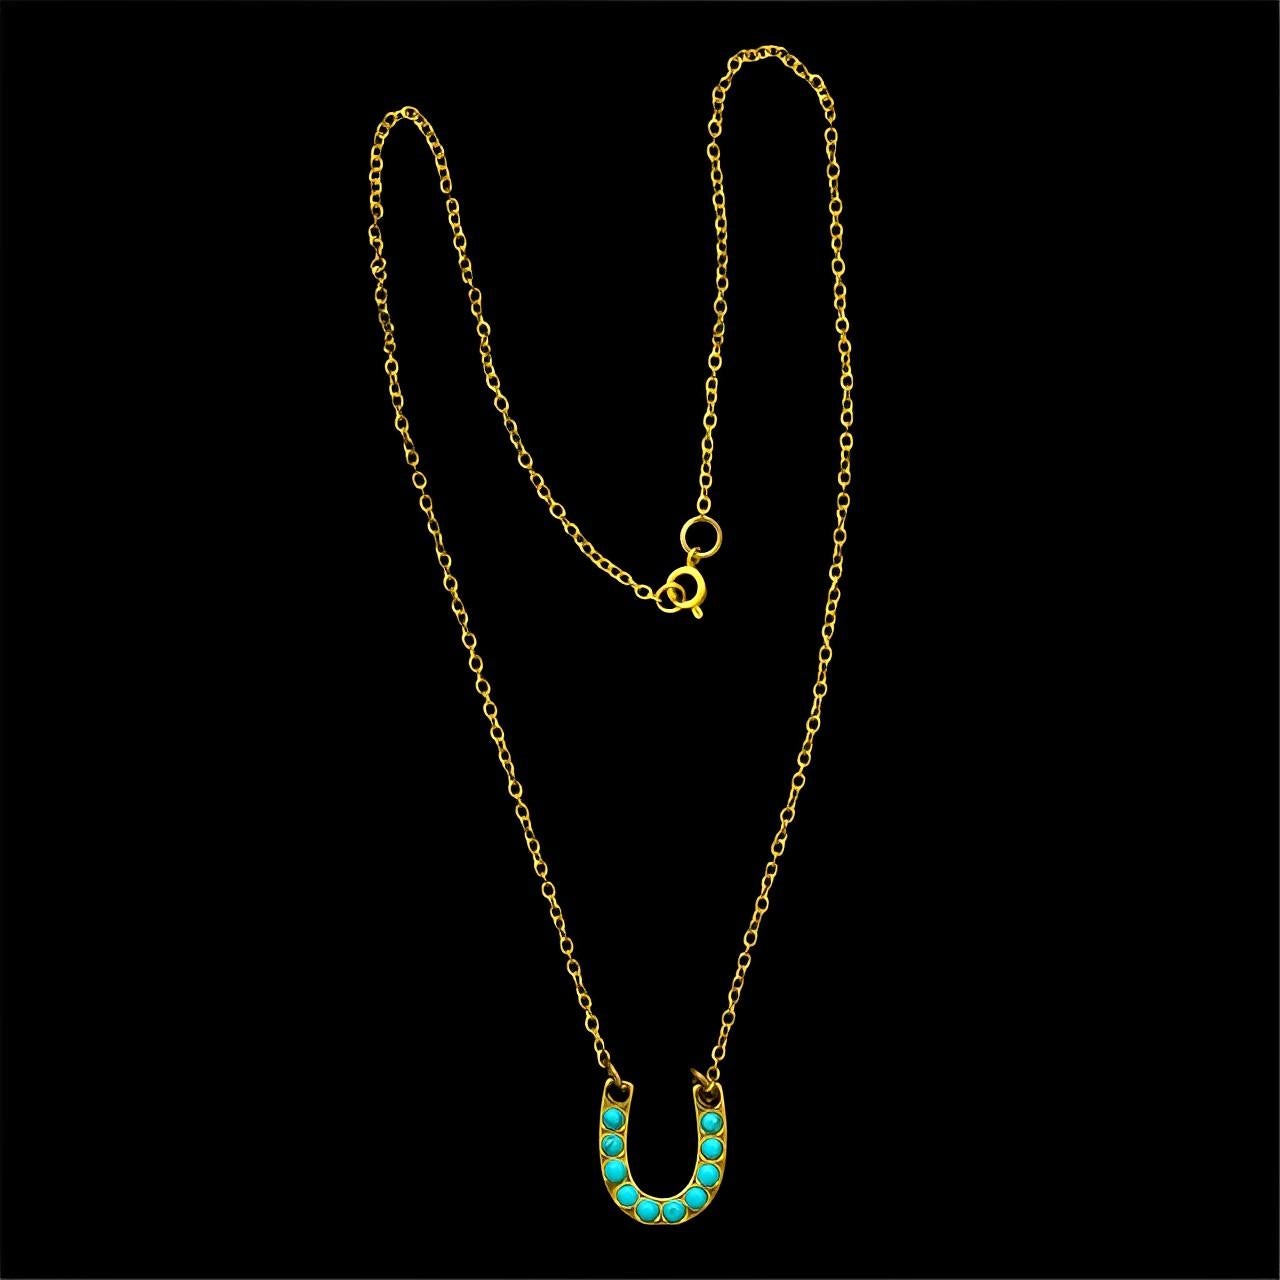 Women's or Men's Antique Gold Gilt Metal and Turquoise Horseshoe Pendant and Chain